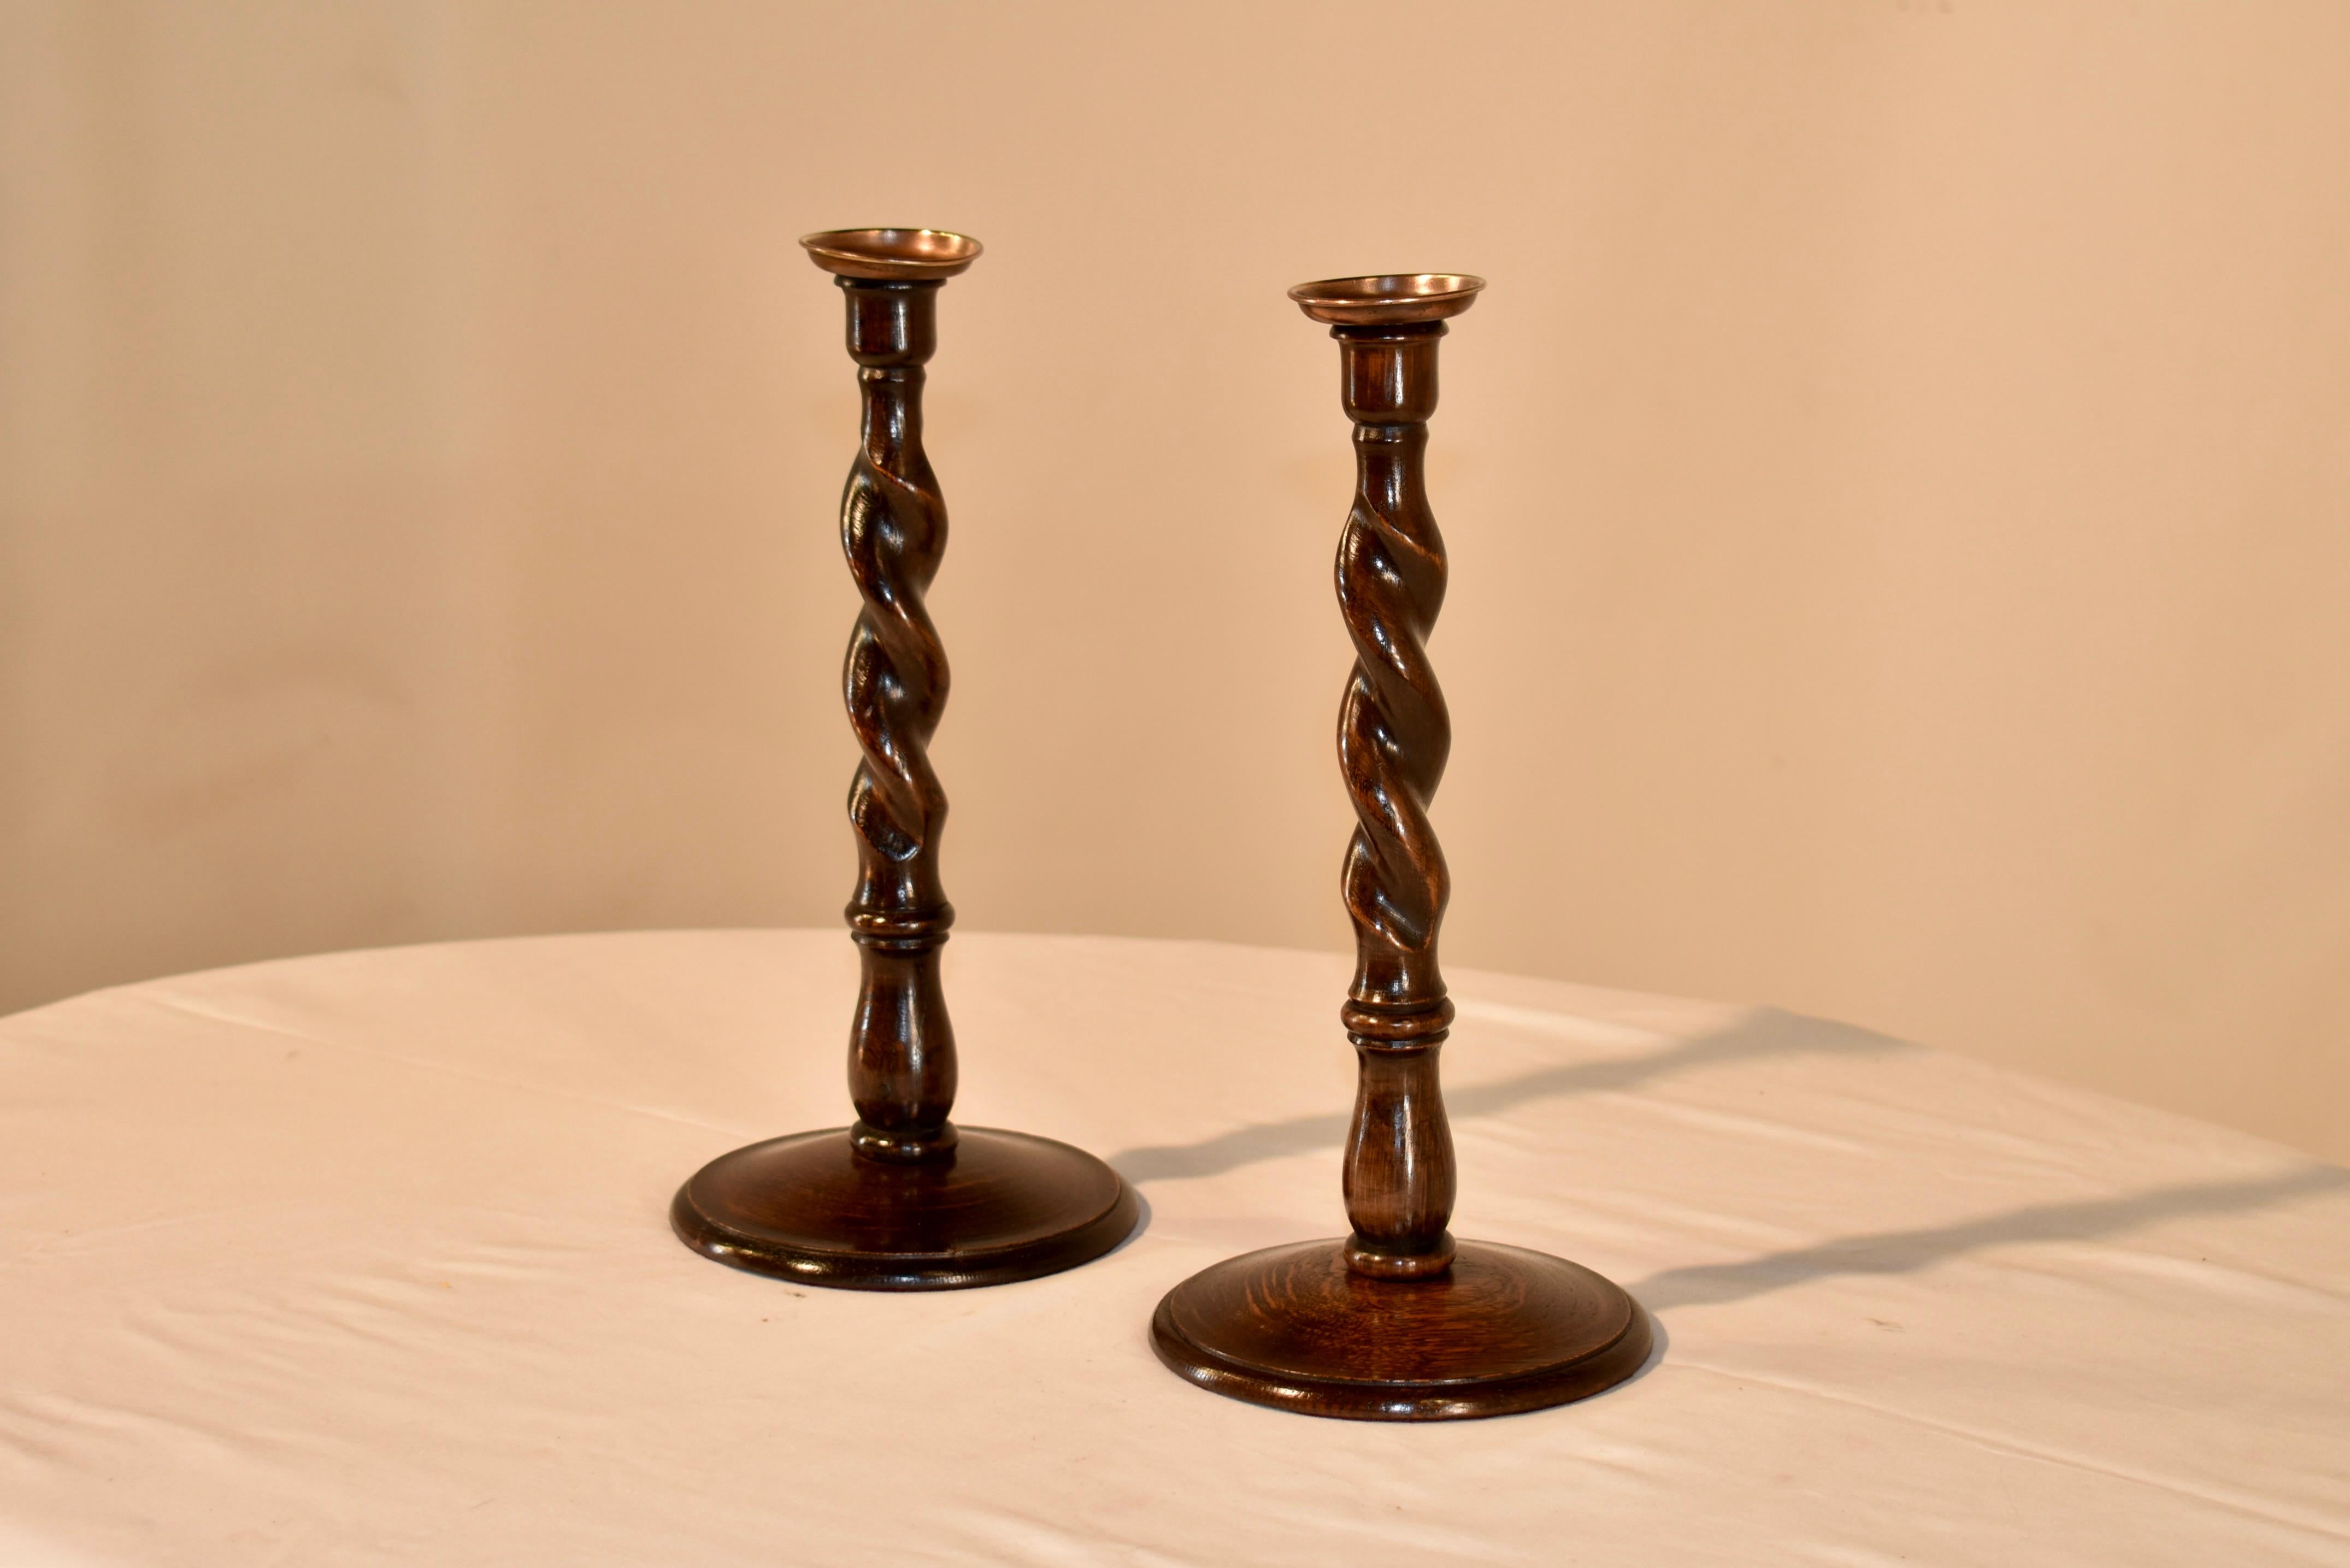 Pair of late 19th century oak candlesticks from England with hand turned candle cups supported on top of barley twist stems and resting on hand turned bases, which have beveled edges along the bases.